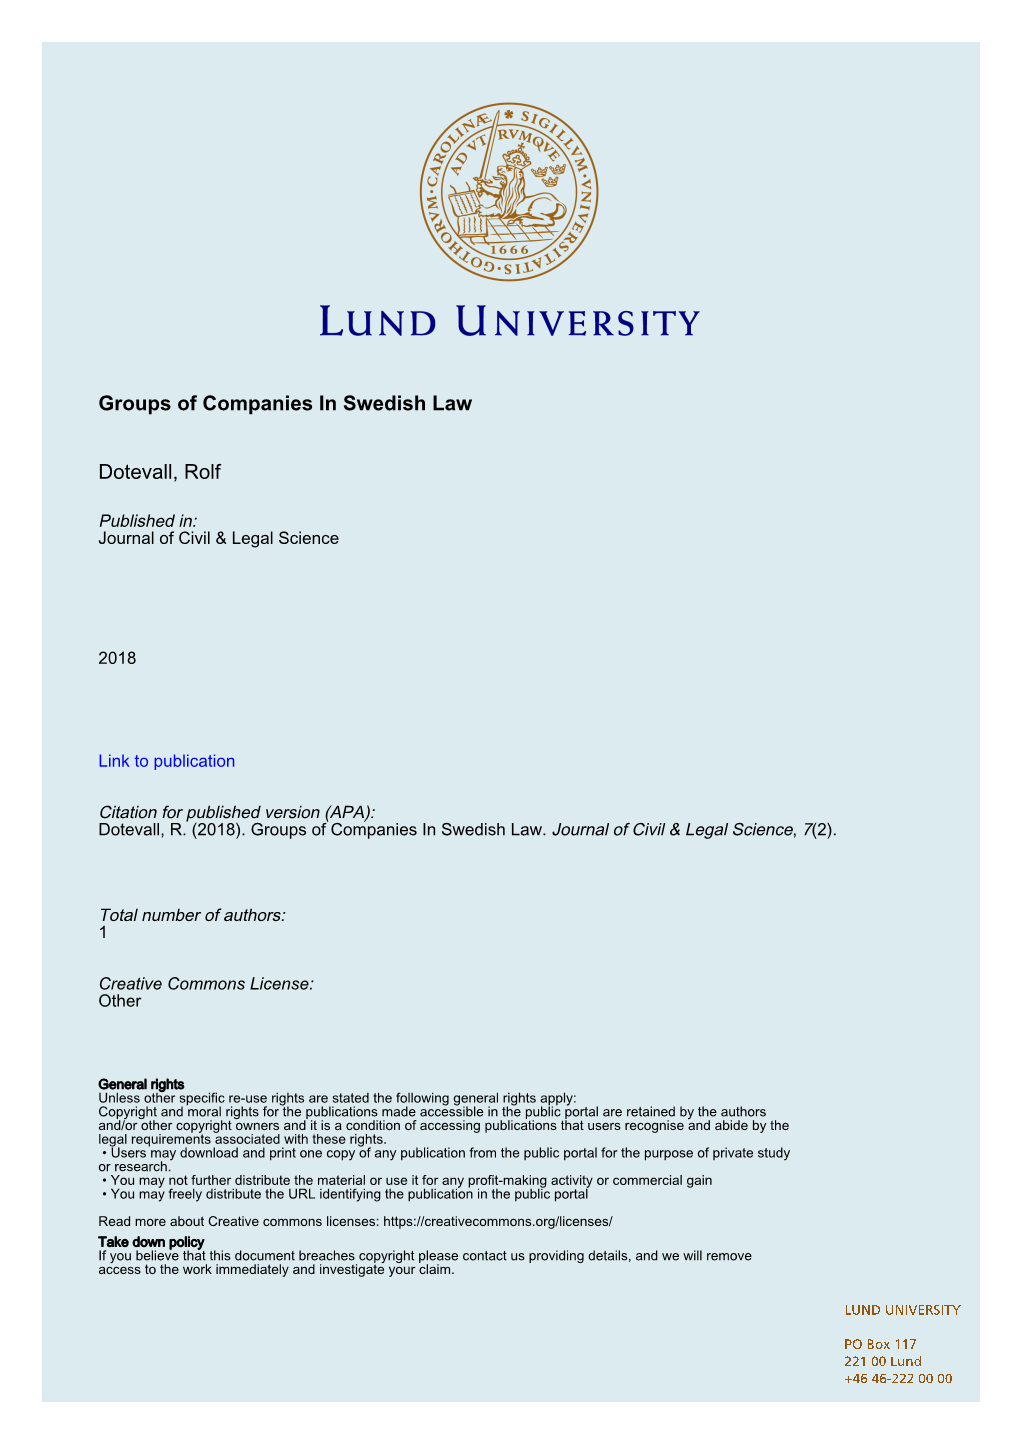 Groups of Companies in Swedish Law